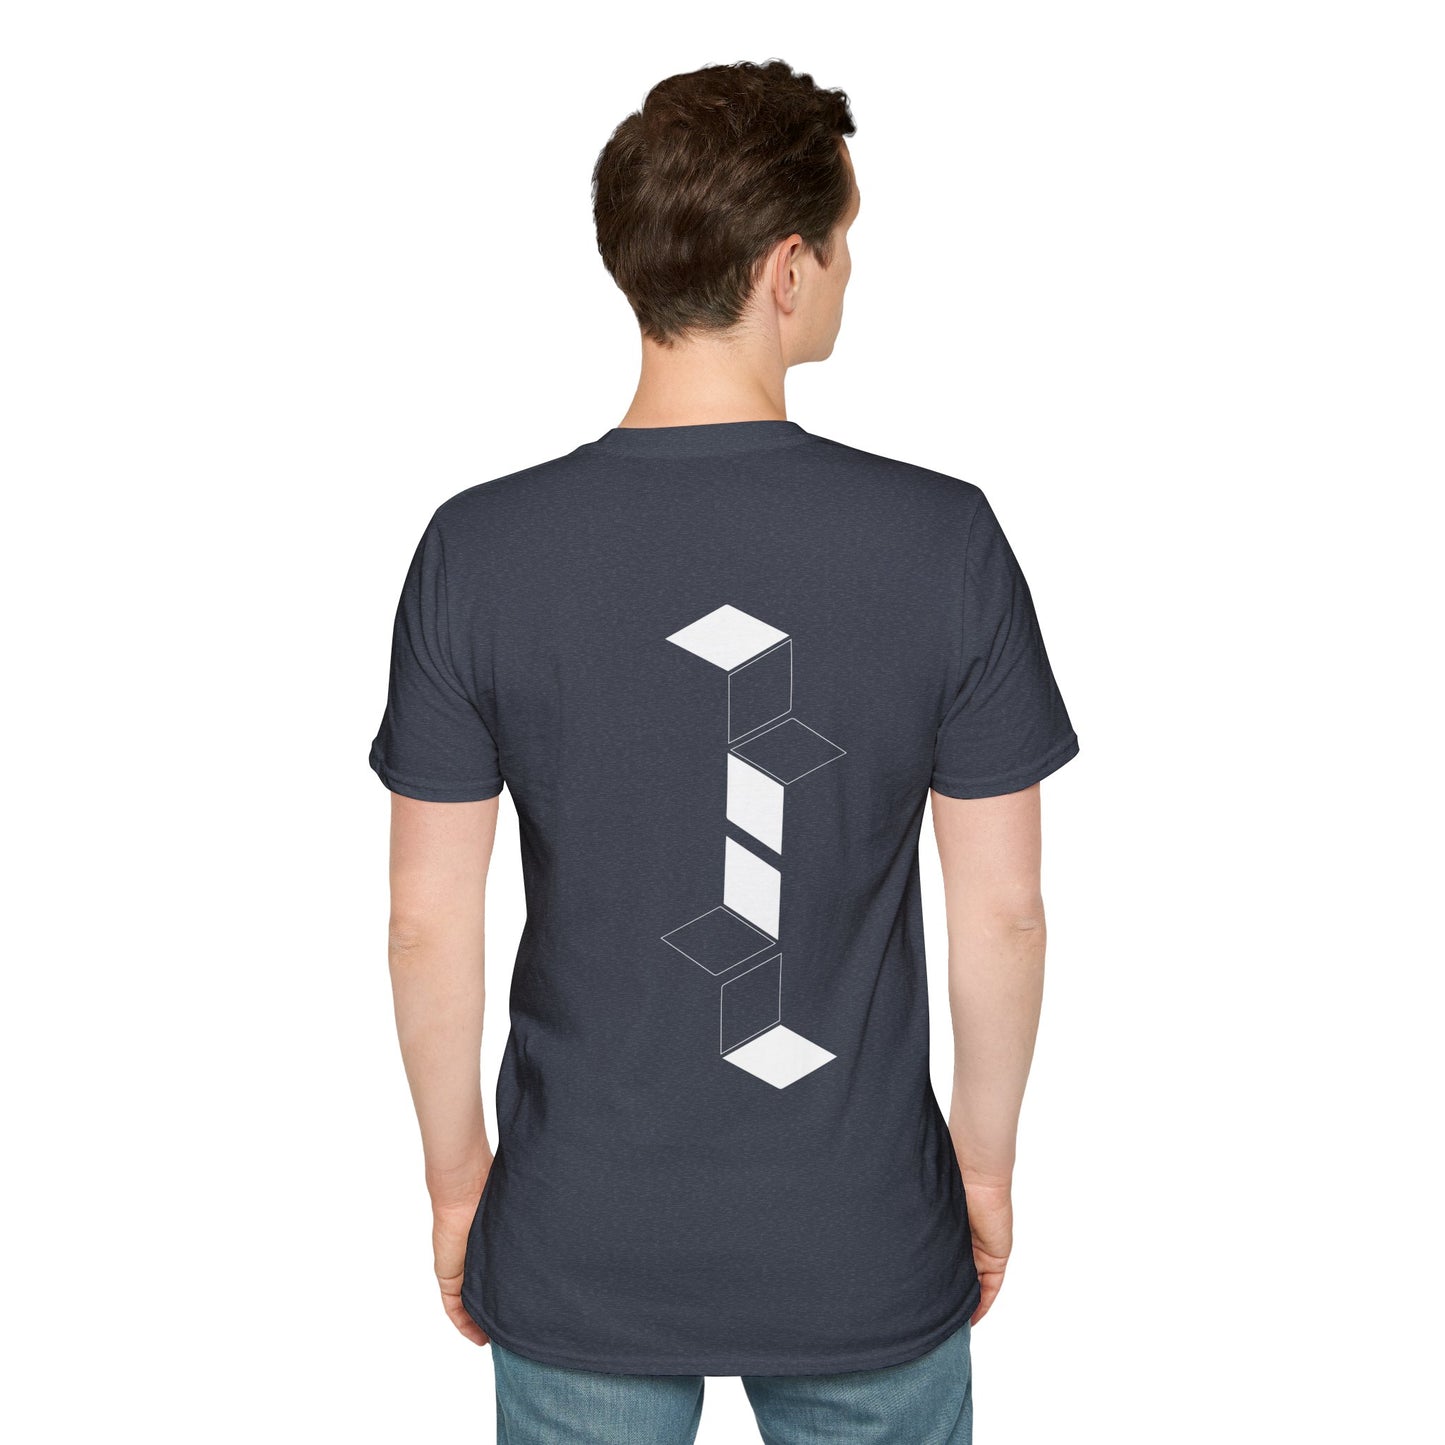 Dark Grey  T-shirt with white geometric cube pattern creating a 3D optical illusion